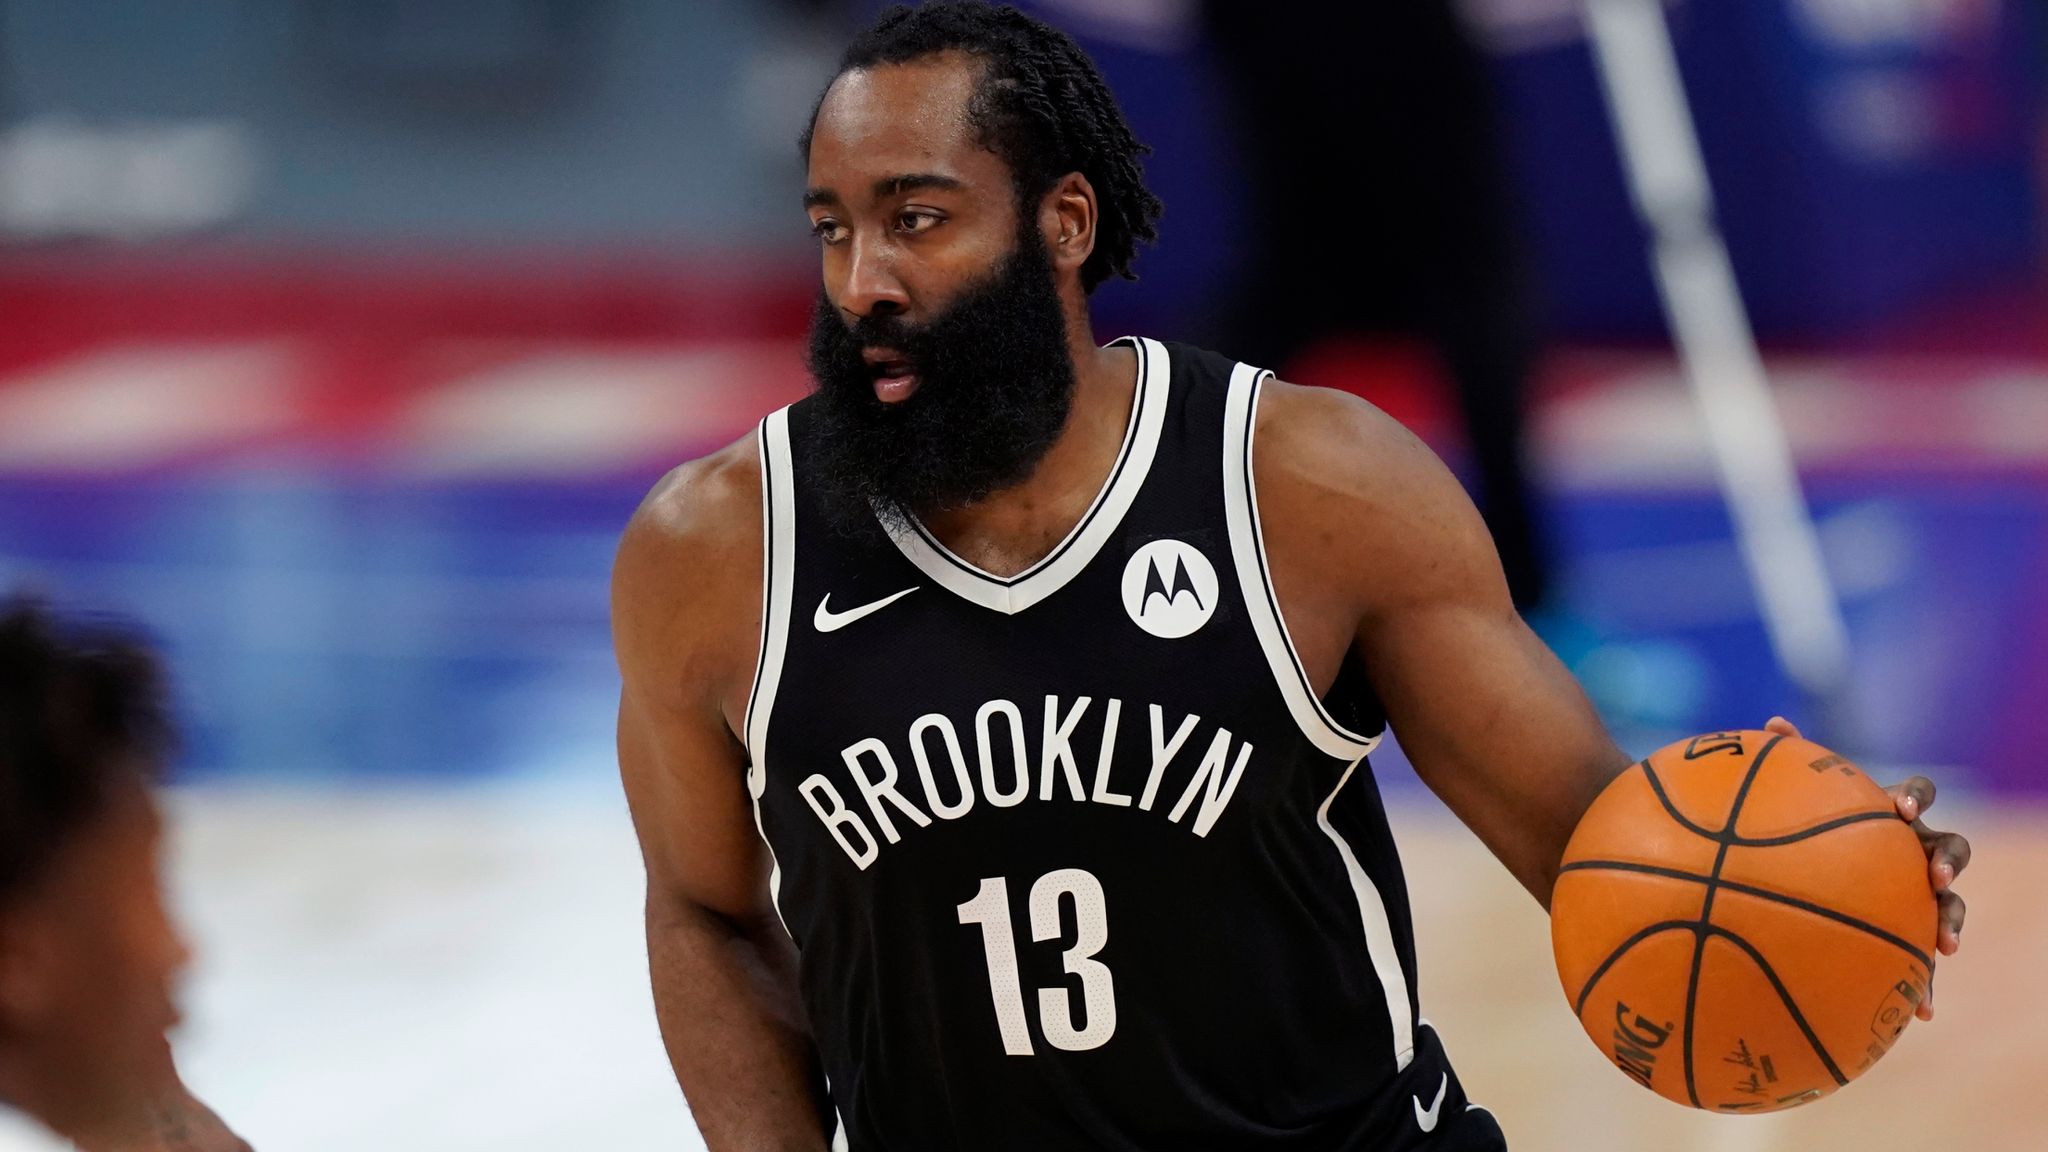 NBA: James Harden hits 44 points as Brooklyn Nets hold off Detroit